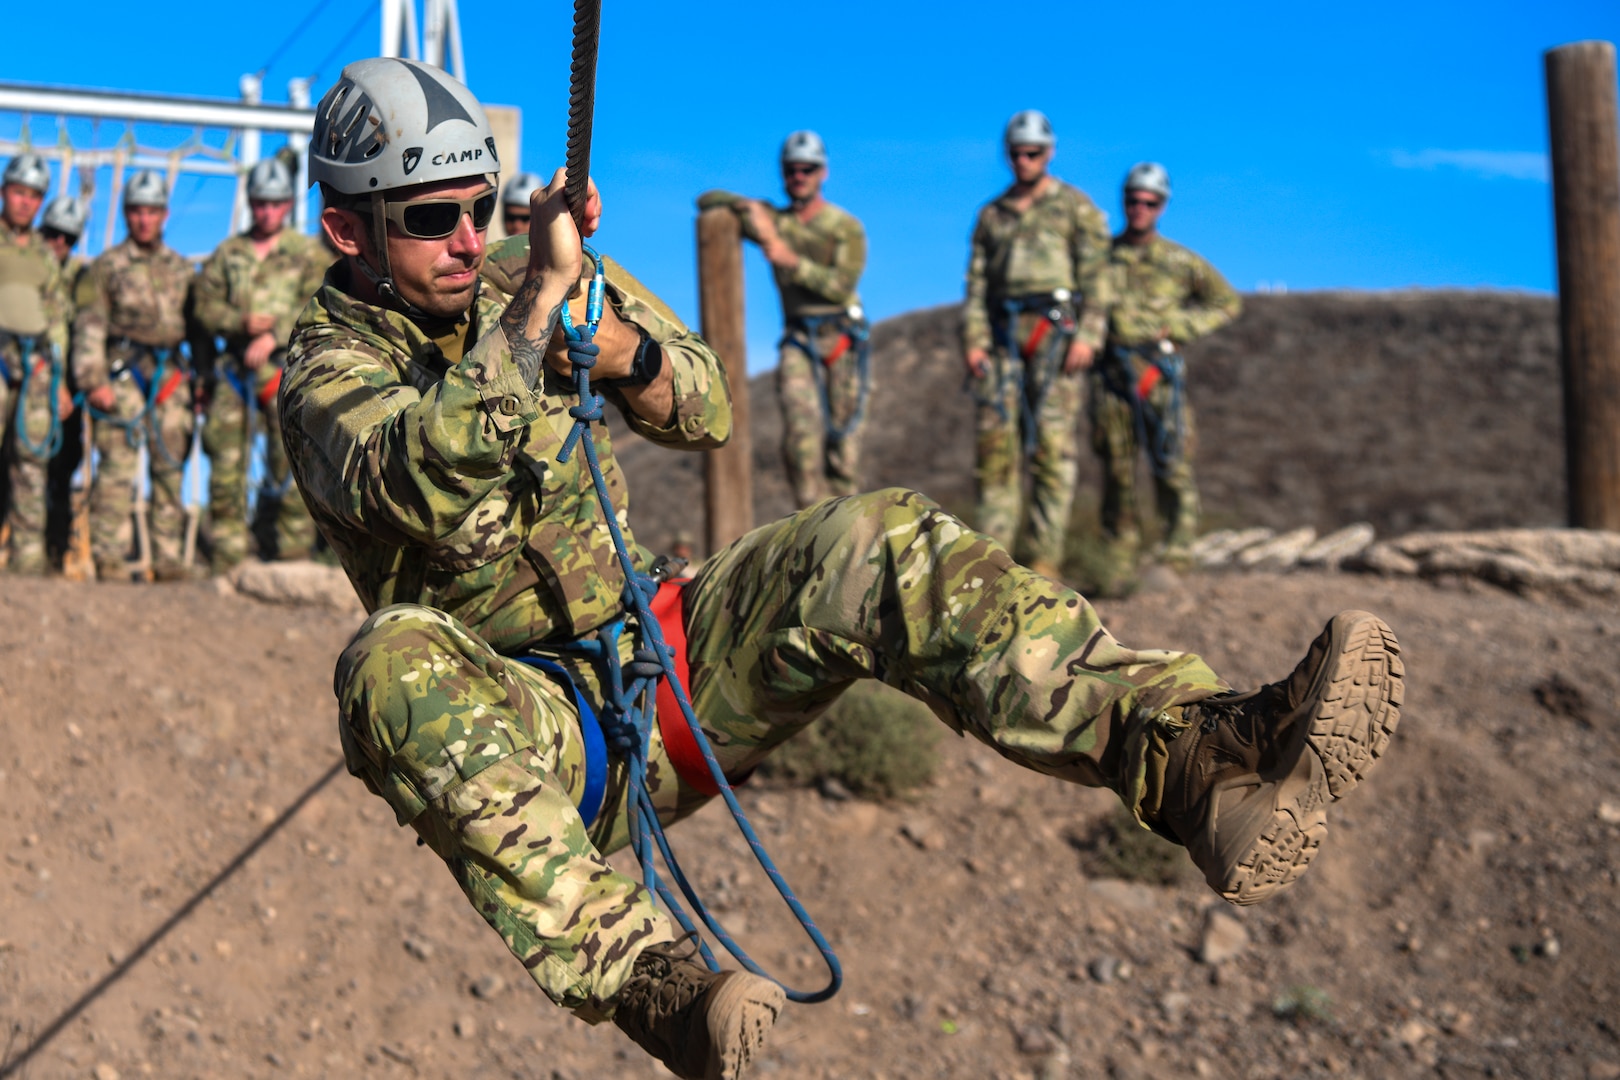 U.S. Air Force Tech. Sgt. Roy Wollgast, an 82nd Expeditionary Rescue Squadron survival, evasion, resistance and escape specialist, completes an obstacle during the French Desert Commando Course at Arta Range, Djibouti, April 26, 2022. Since 2015, the French Forces stationed in Djibouti have invited U.S. service members with the Combined Joint Task Force – Horn of Africa and Camp Lemonnier to participate in the course.